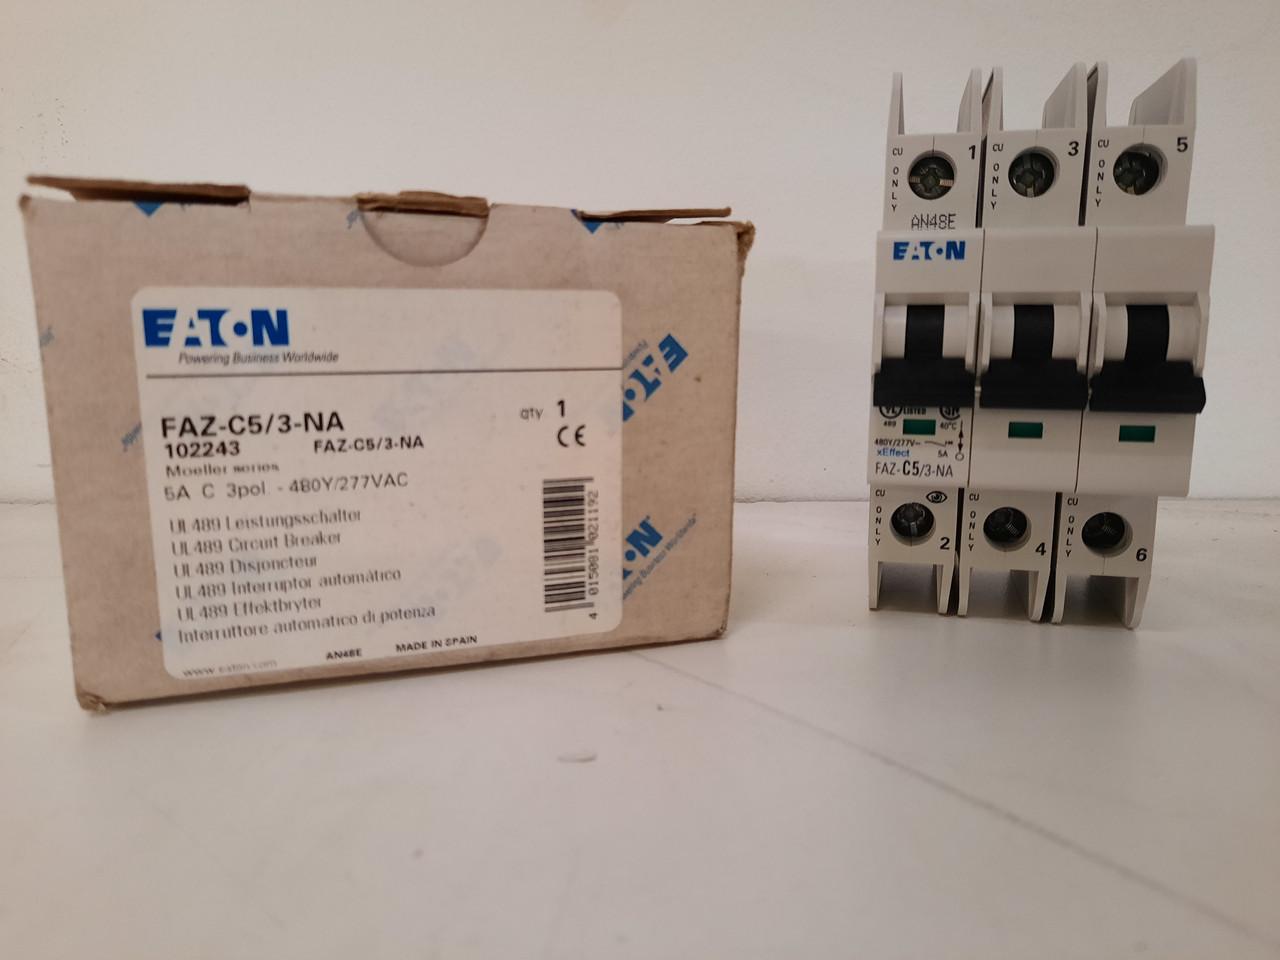 Eaton FAZ-C5/3-NA 277/480 VAC 50/60 Hz, 5 A, 3-Pole, 10/14 kA, 5 to 10 x Rated Current, Screw Terminal, DIN Rail Mount, Standard Packaging, C-Curve, Current Limiting, Thermal Magnetic